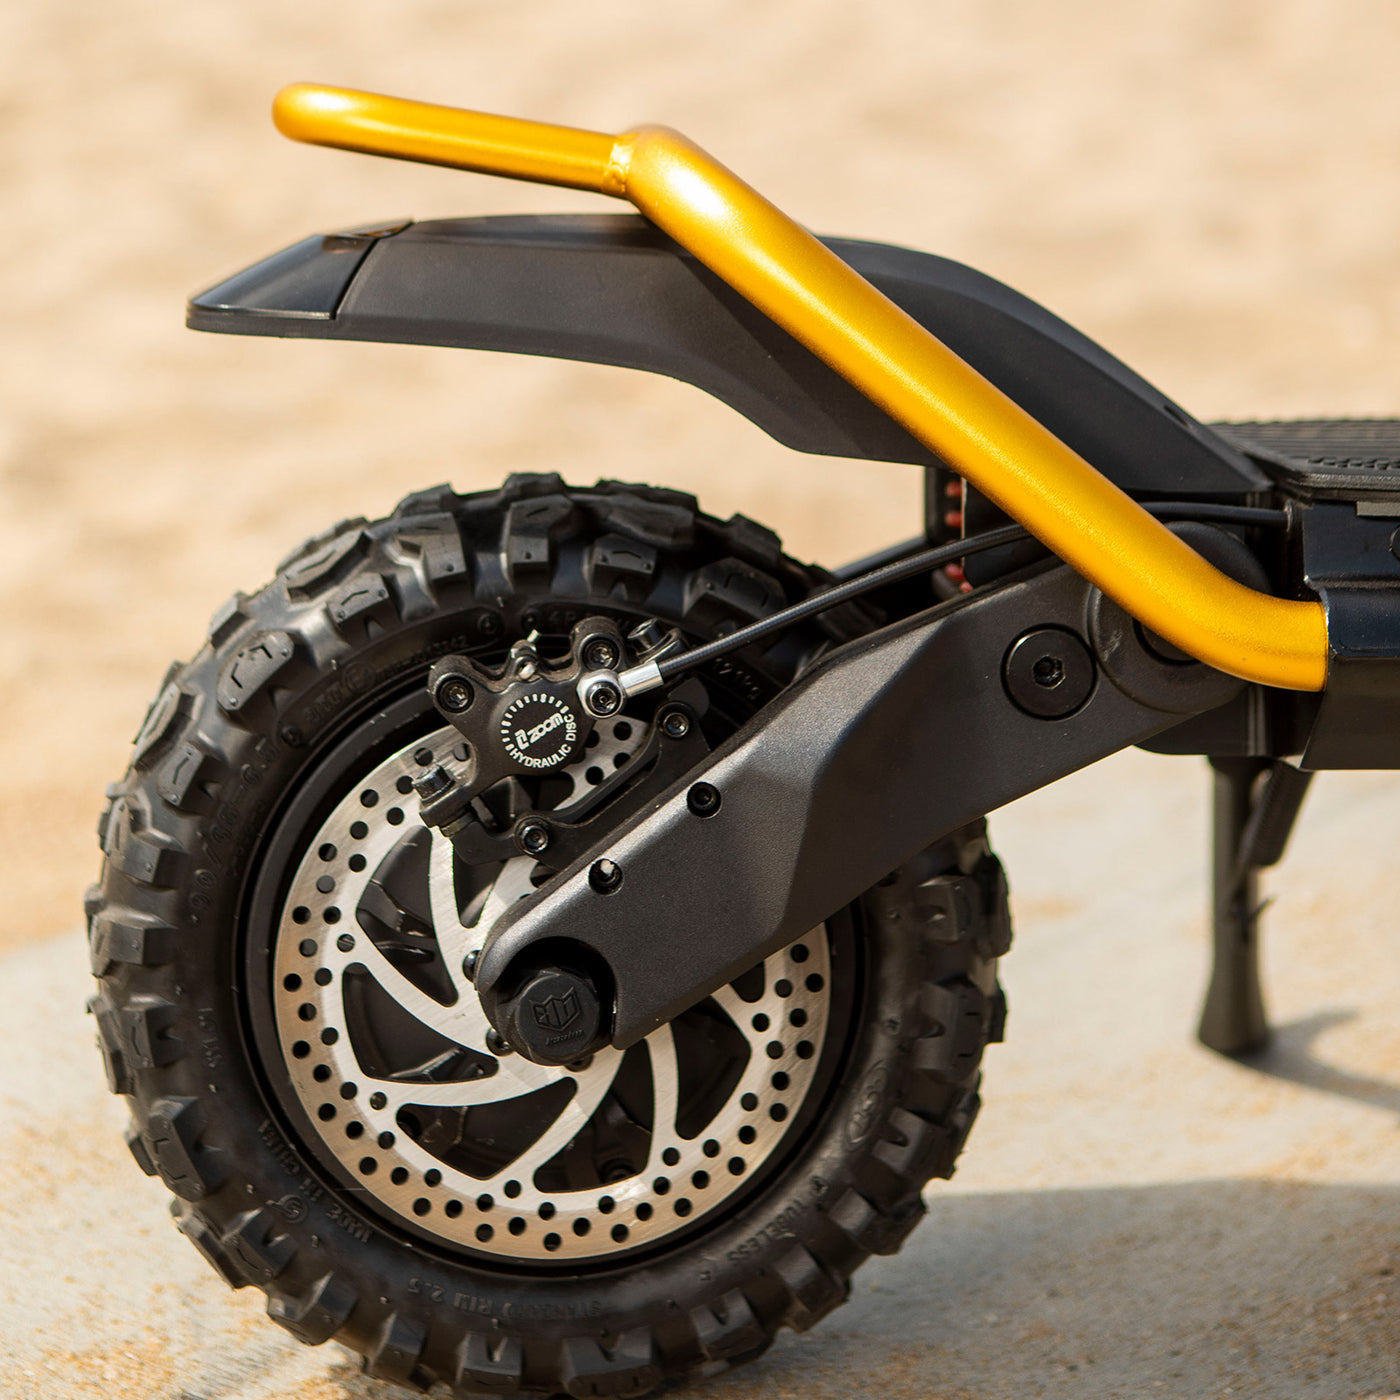 A close-up view of the Kaabo electric scooter's rear wheel, showing the intricate disc brake system, off-road tire, and the suspension with yellow accents.